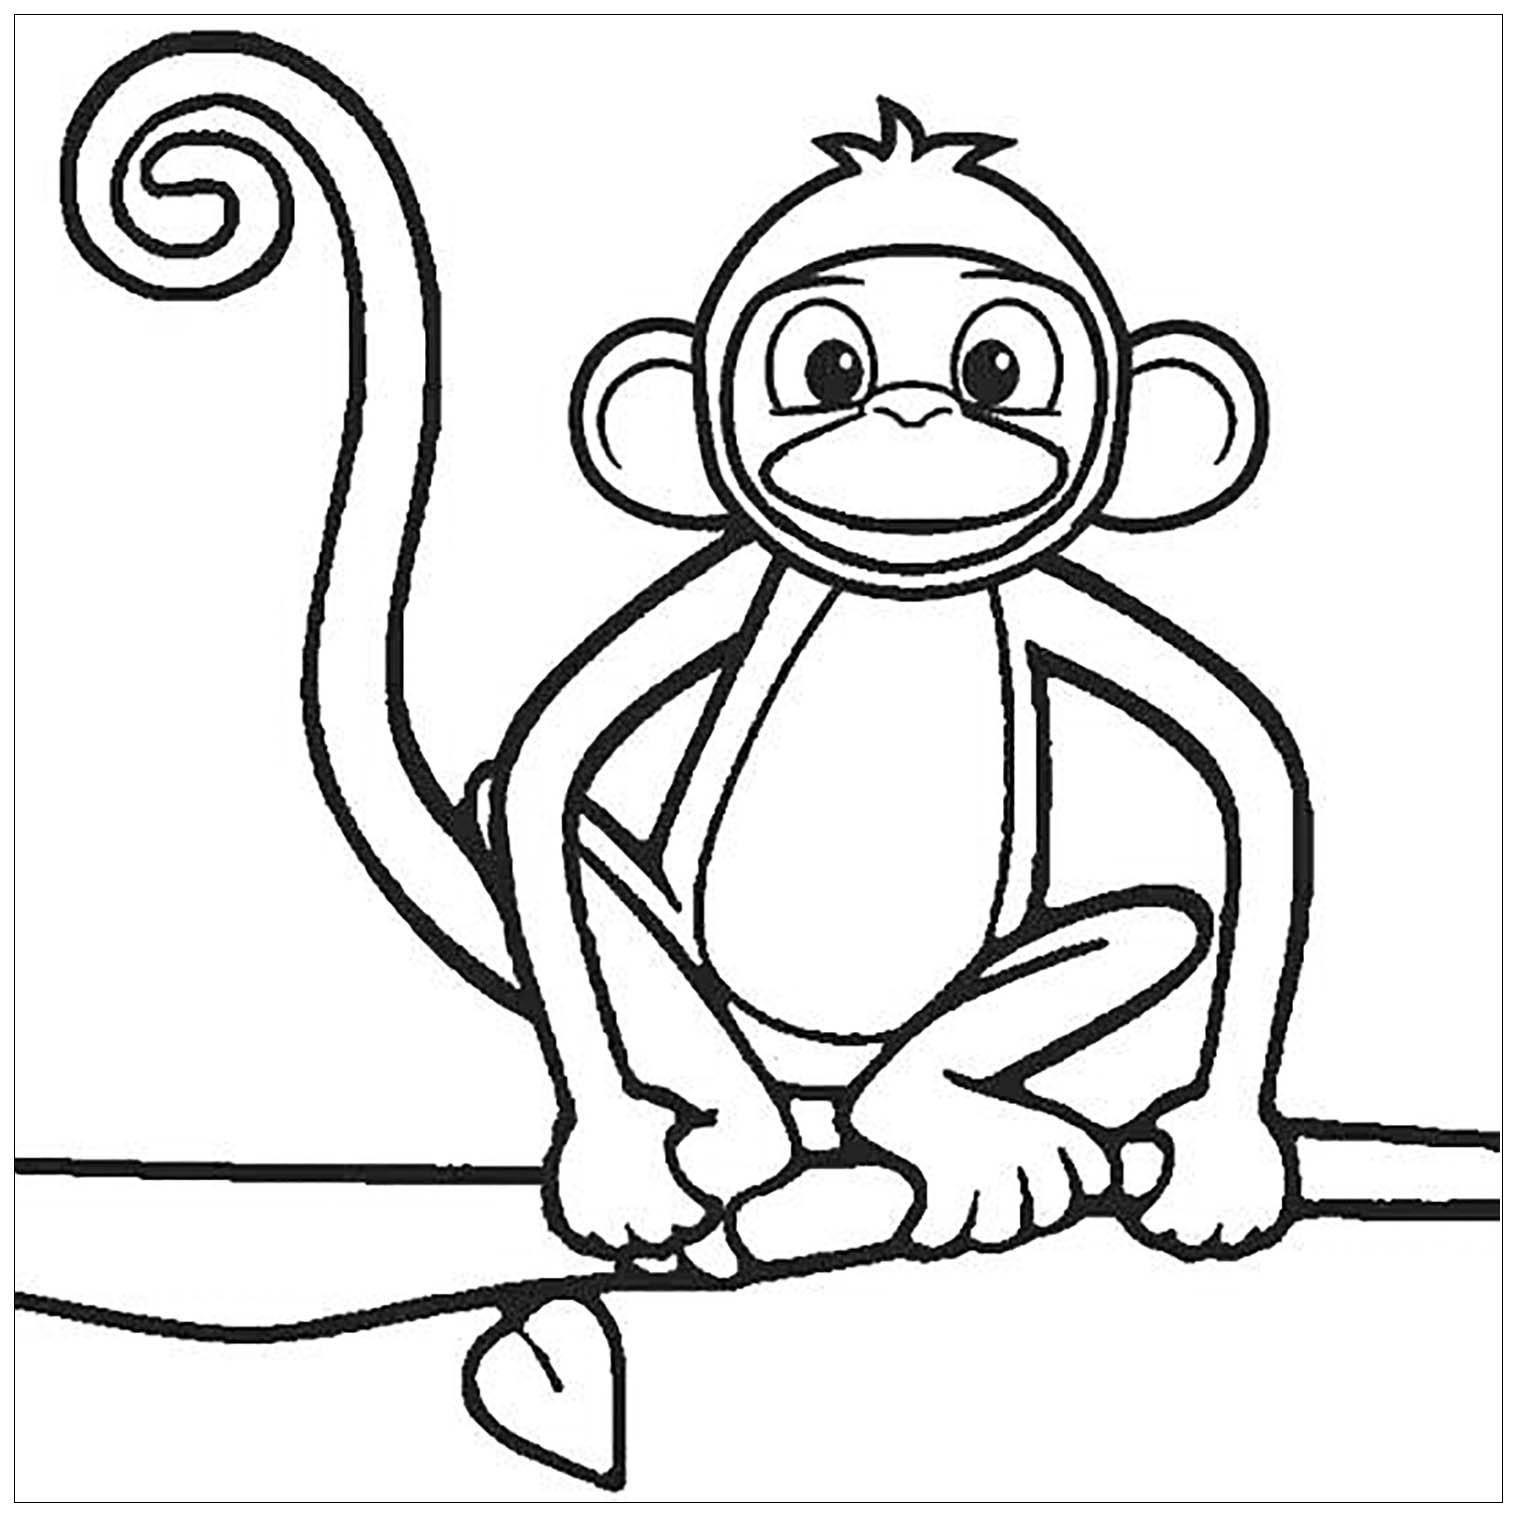 50-best-ideas-for-coloring-monkey-coloring-worksheet